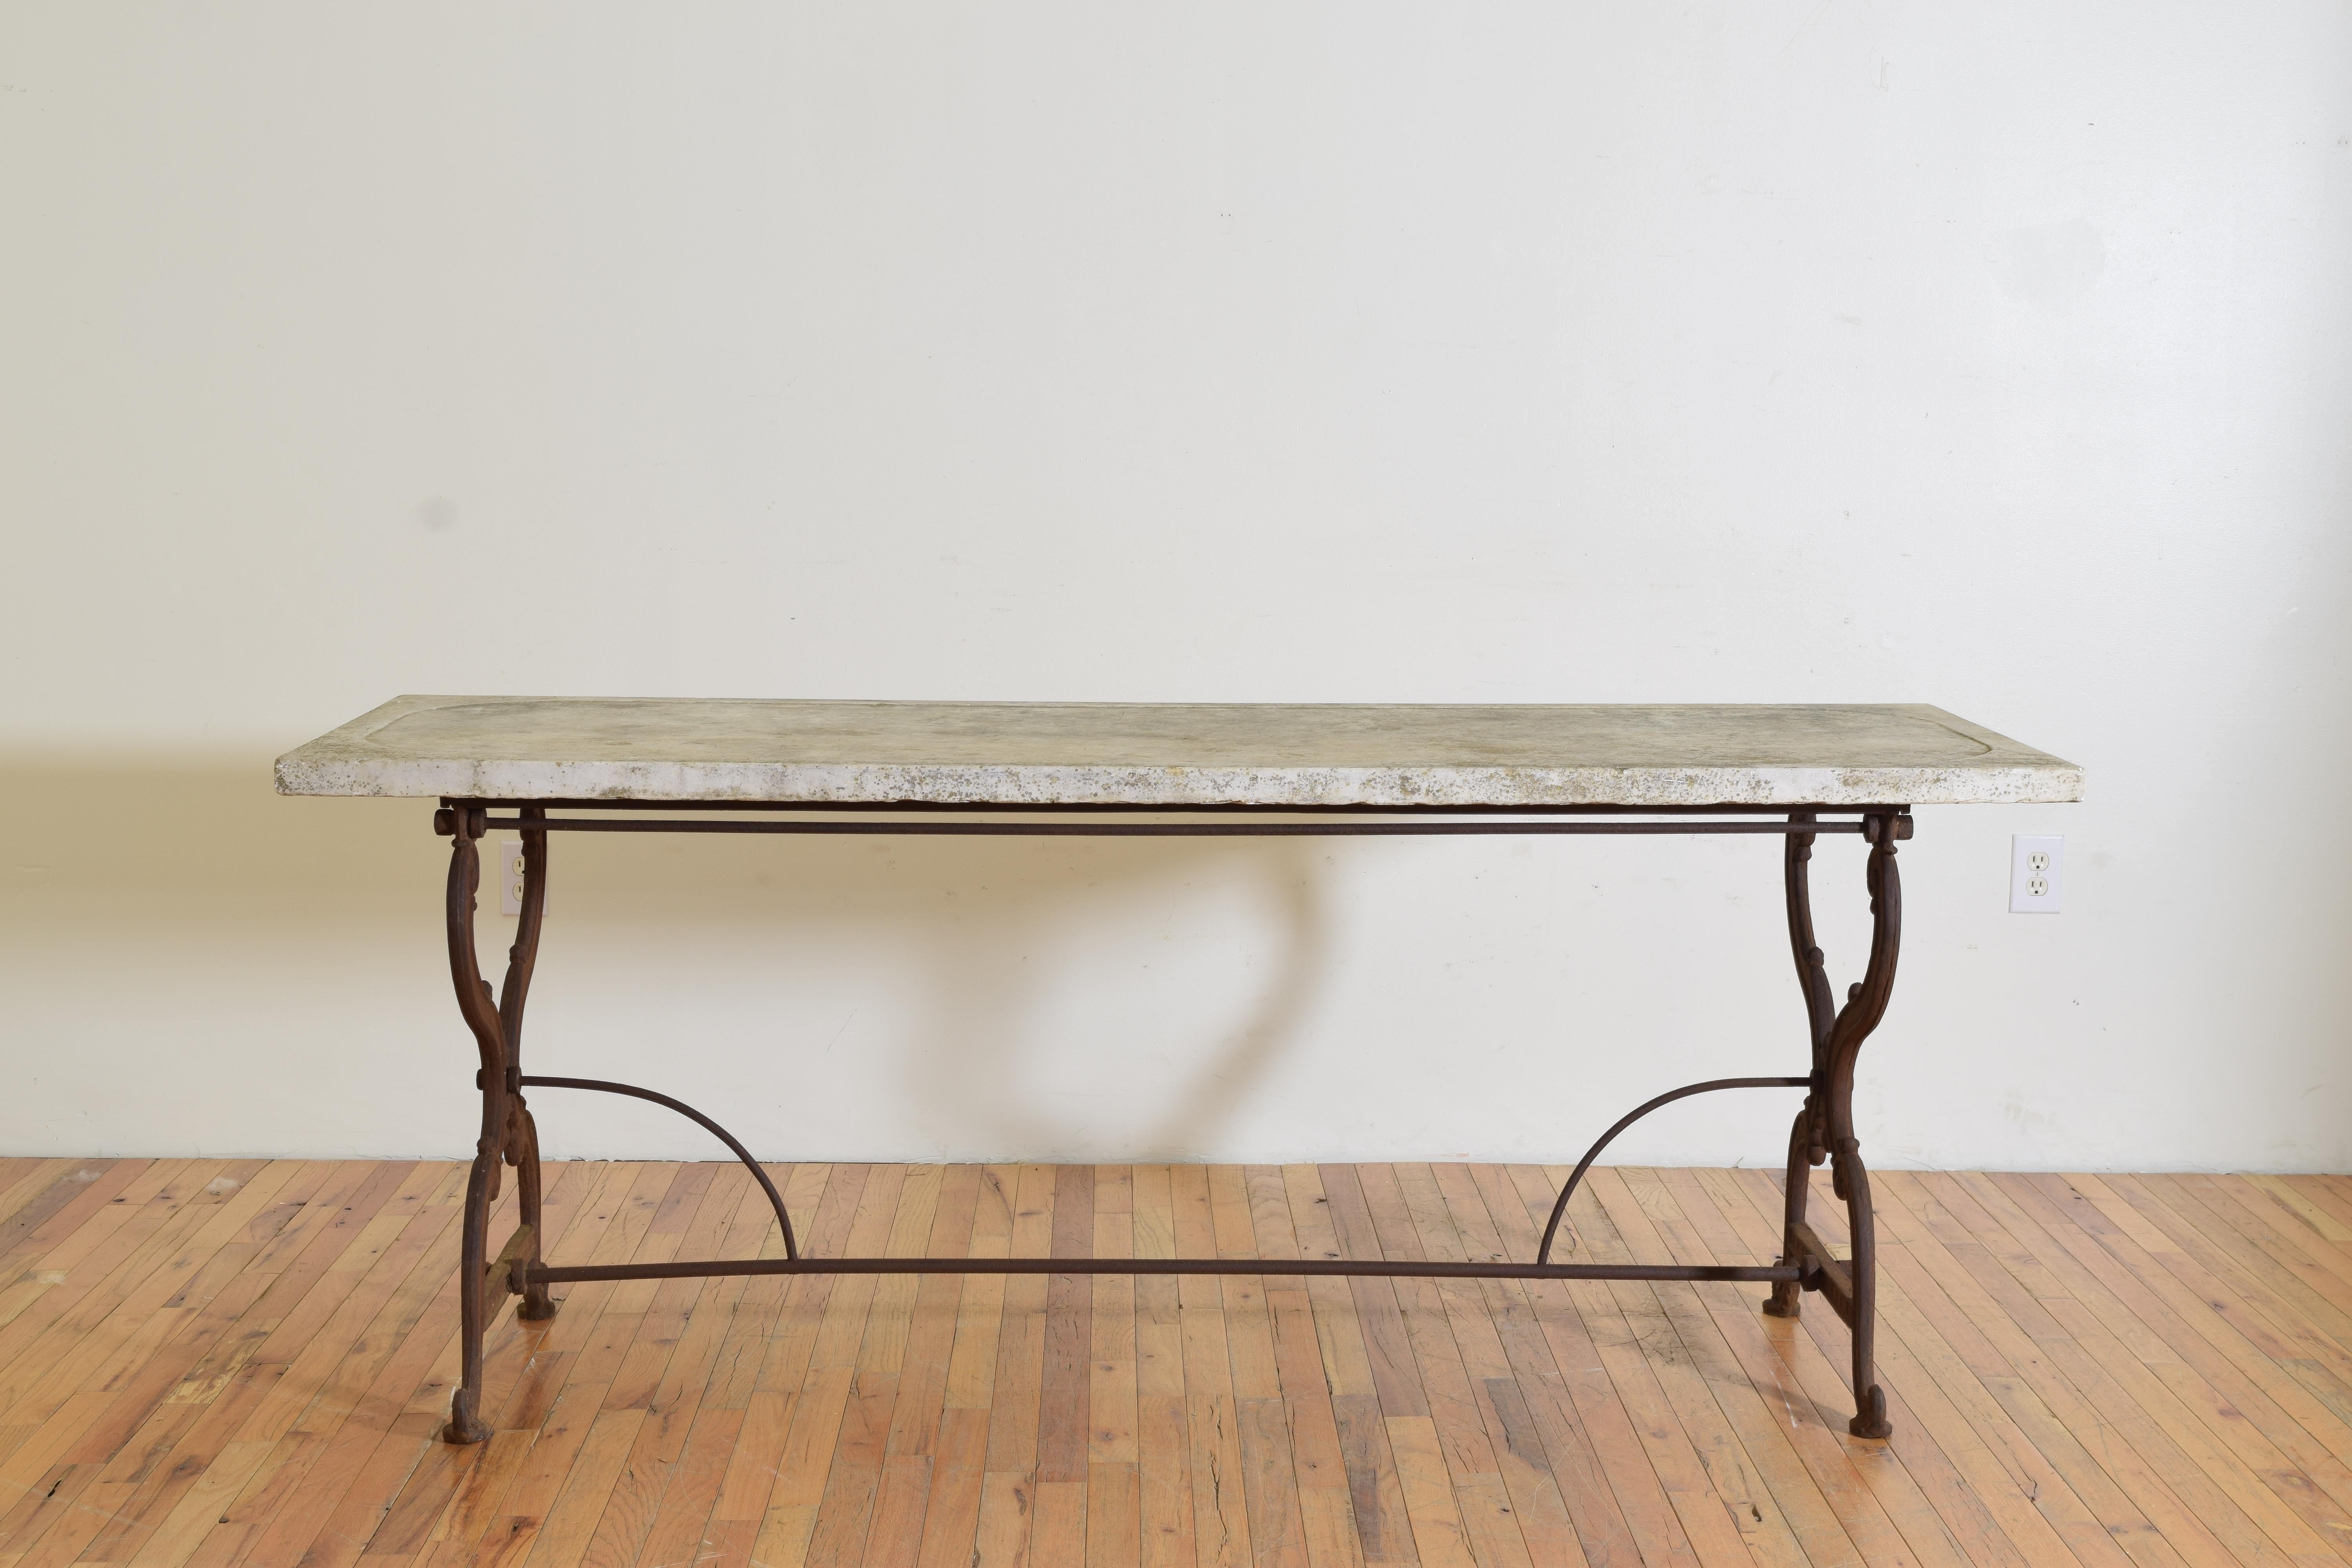 French Late Victorian Wrought Iron & Marble Gardener’s Table, lastq 19th cen. In Good Condition For Sale In Atlanta, GA